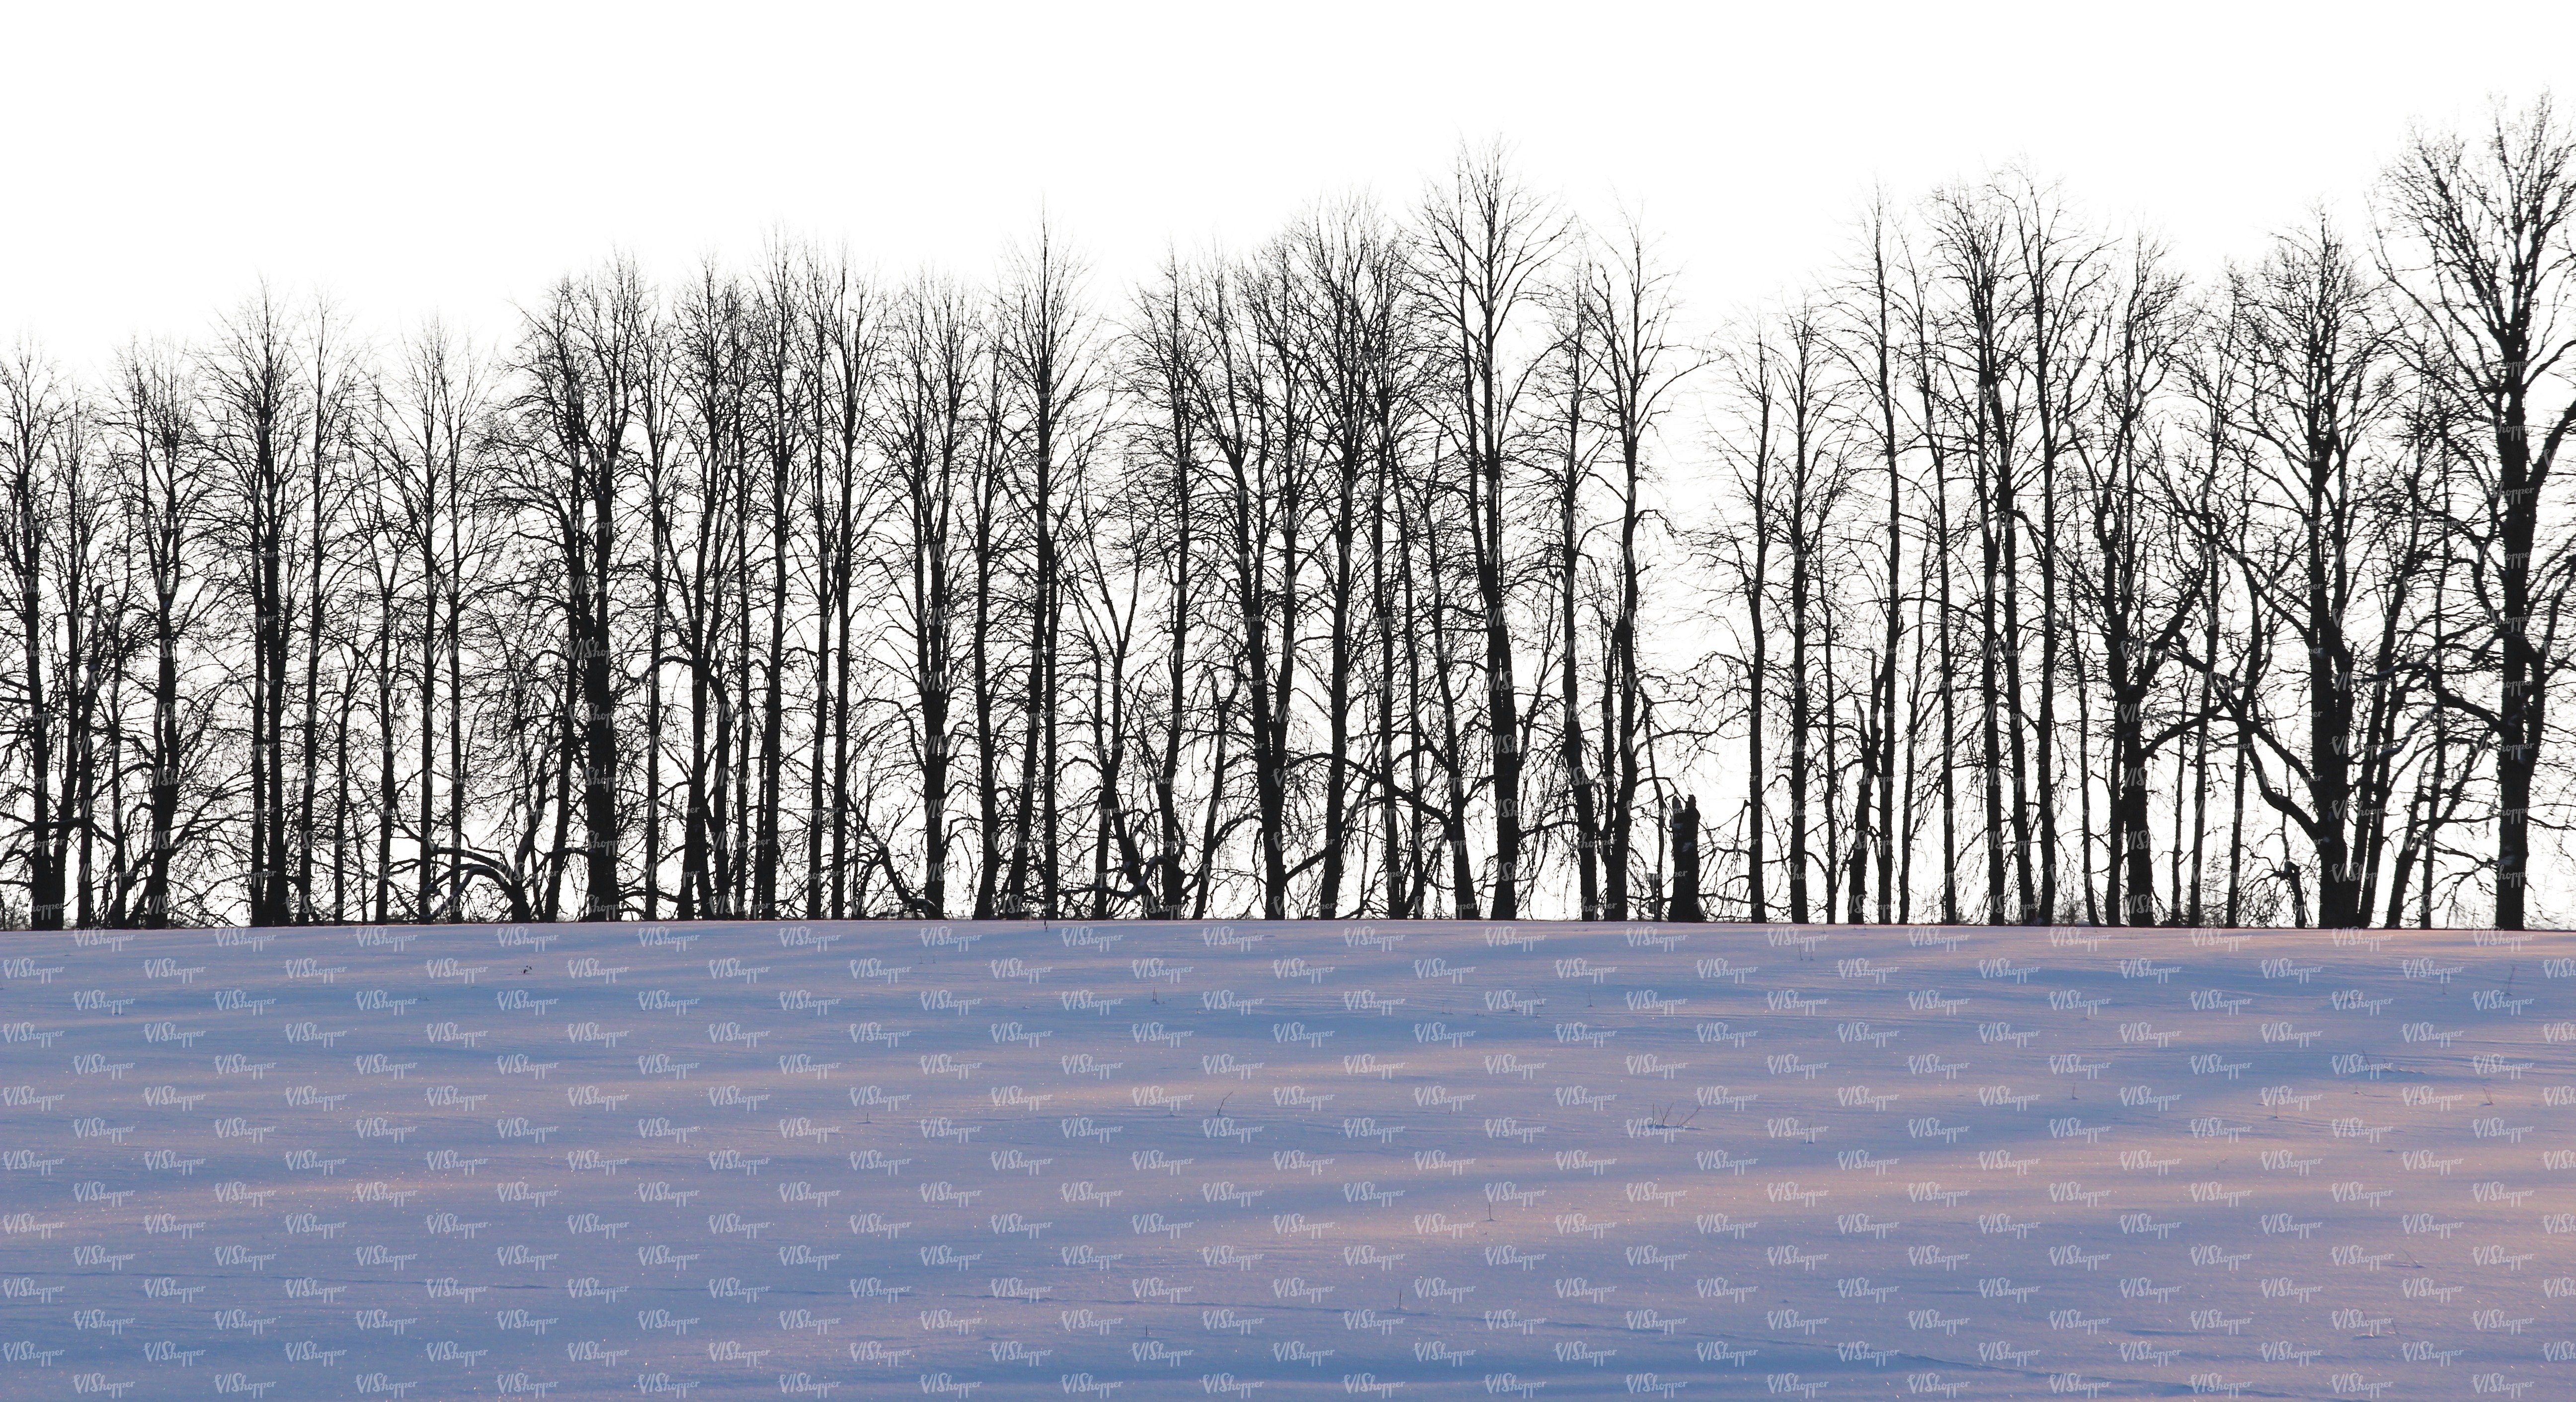 row of bare trees in wintertime - cut out backgrounds - VIShopper